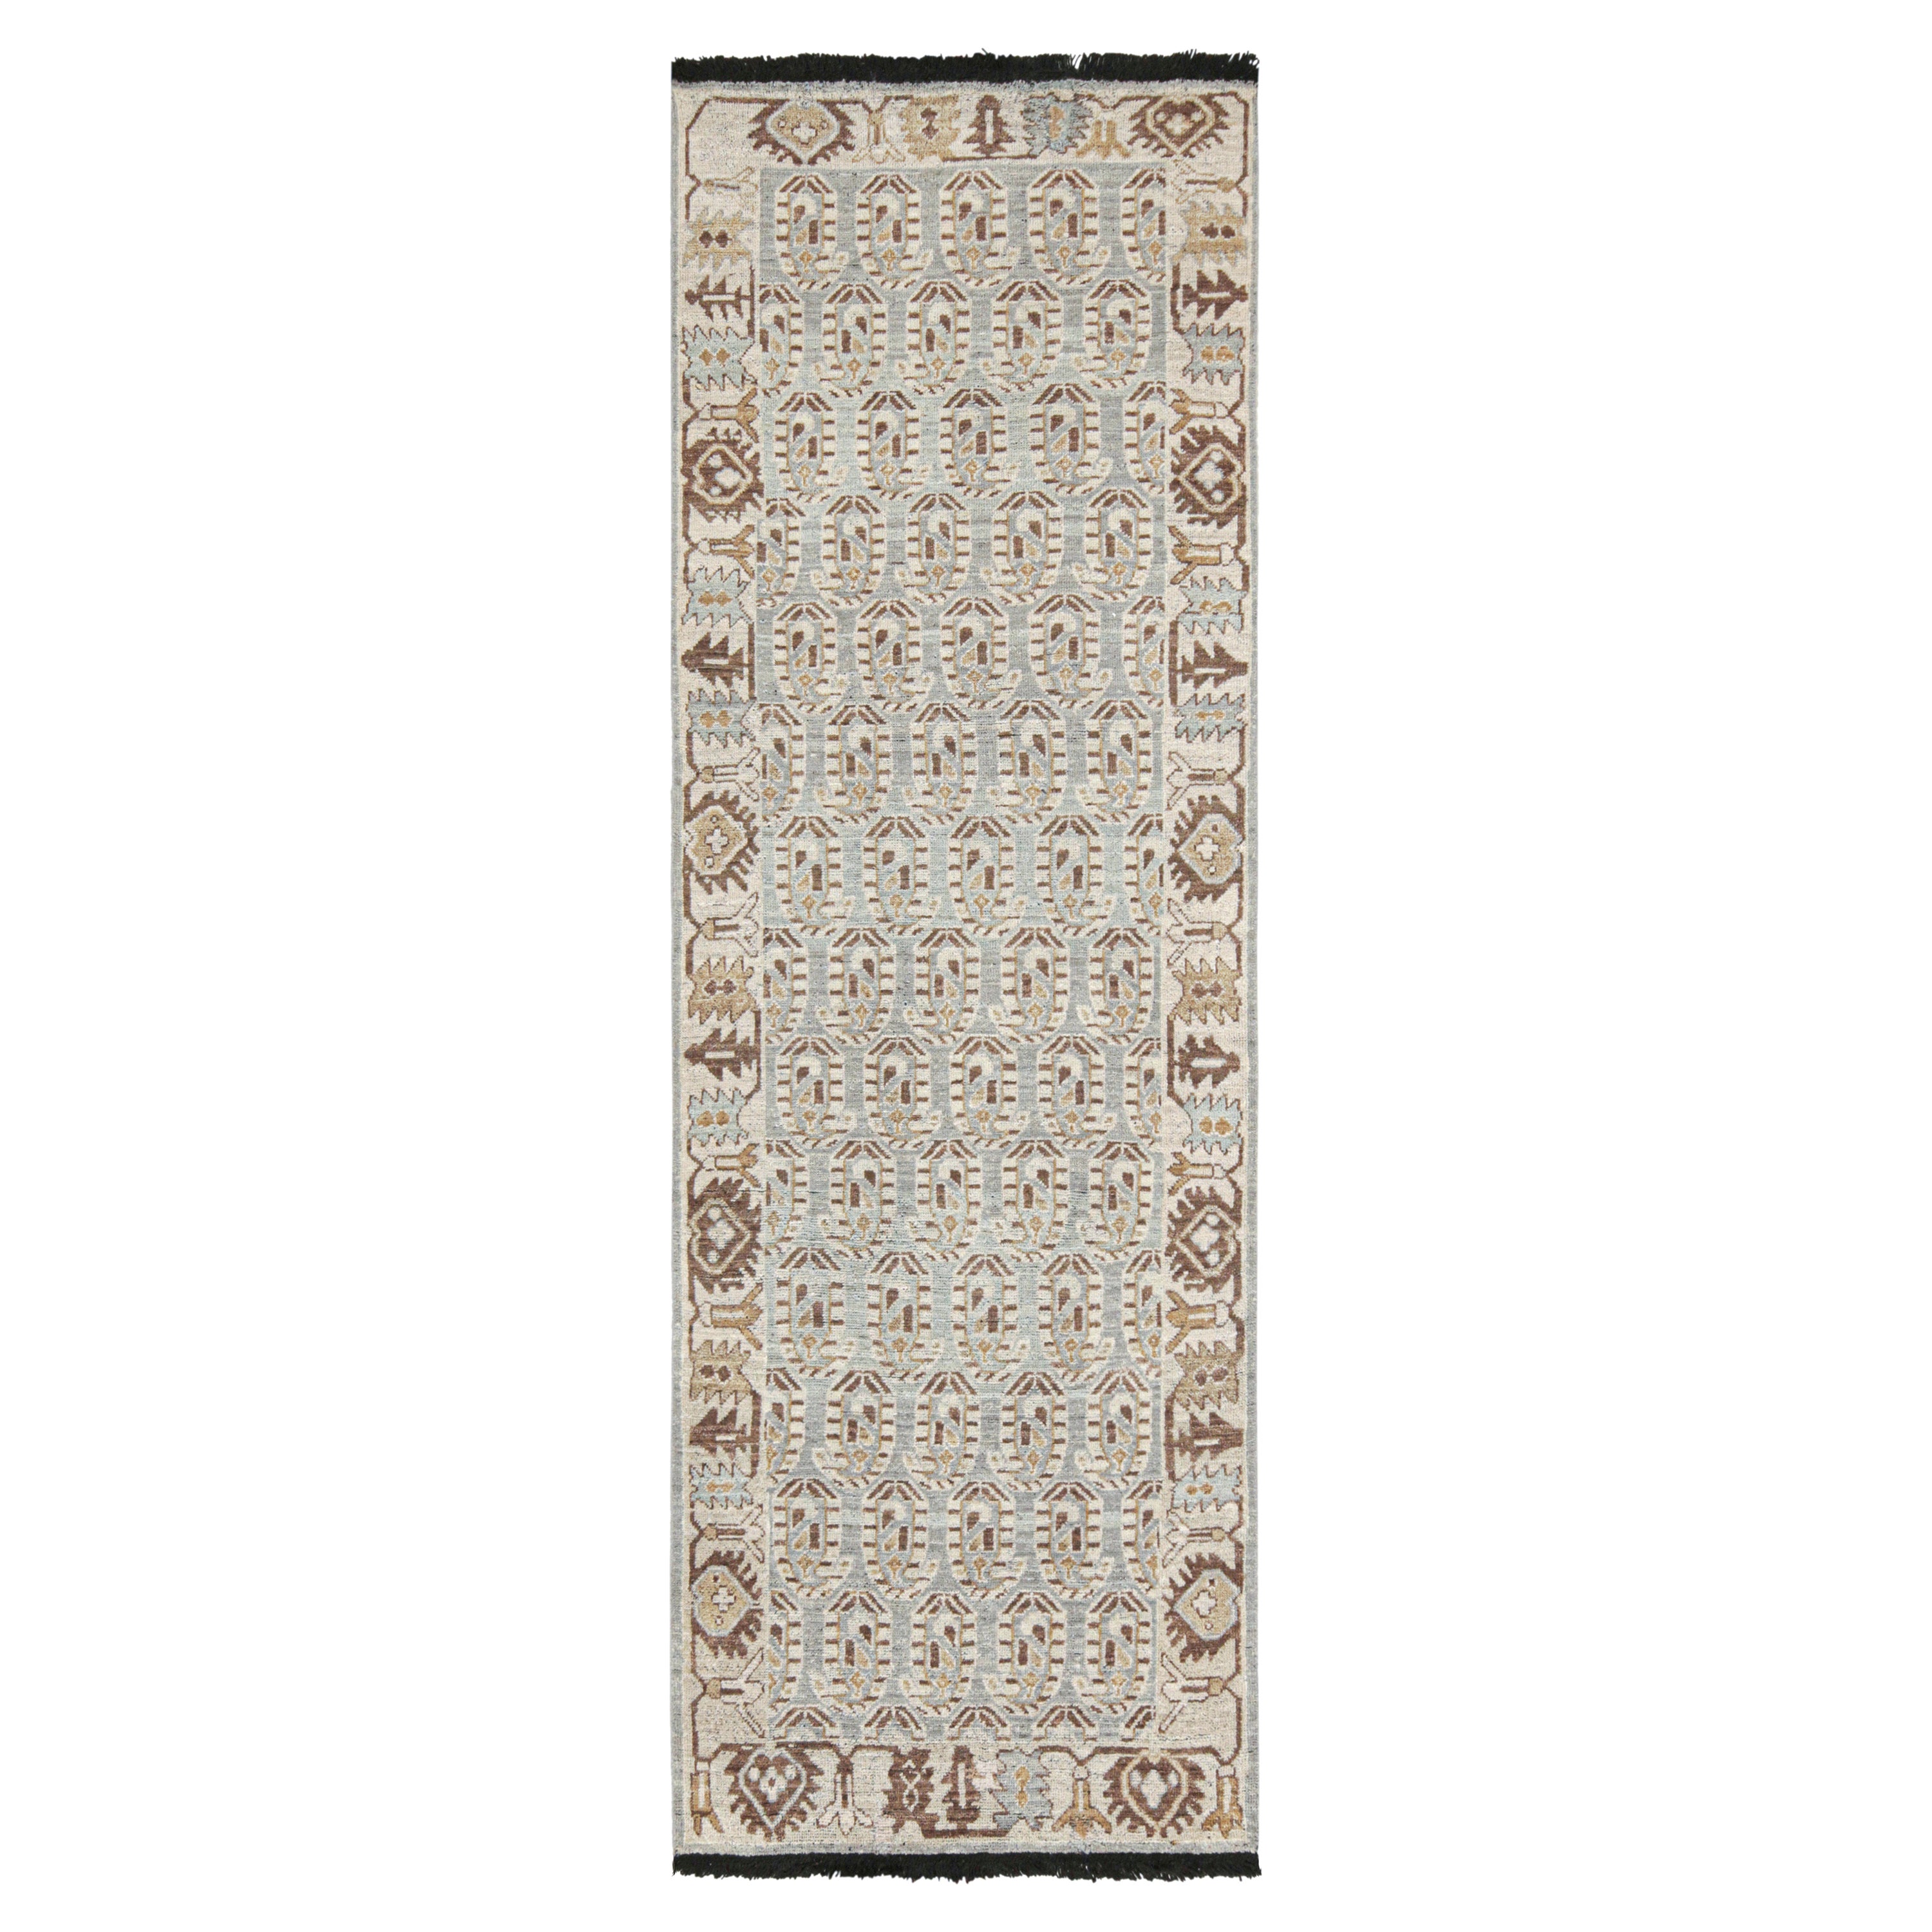 Rug & Kilim’s Tribal-Style Custom Runner with Paisley Patterns